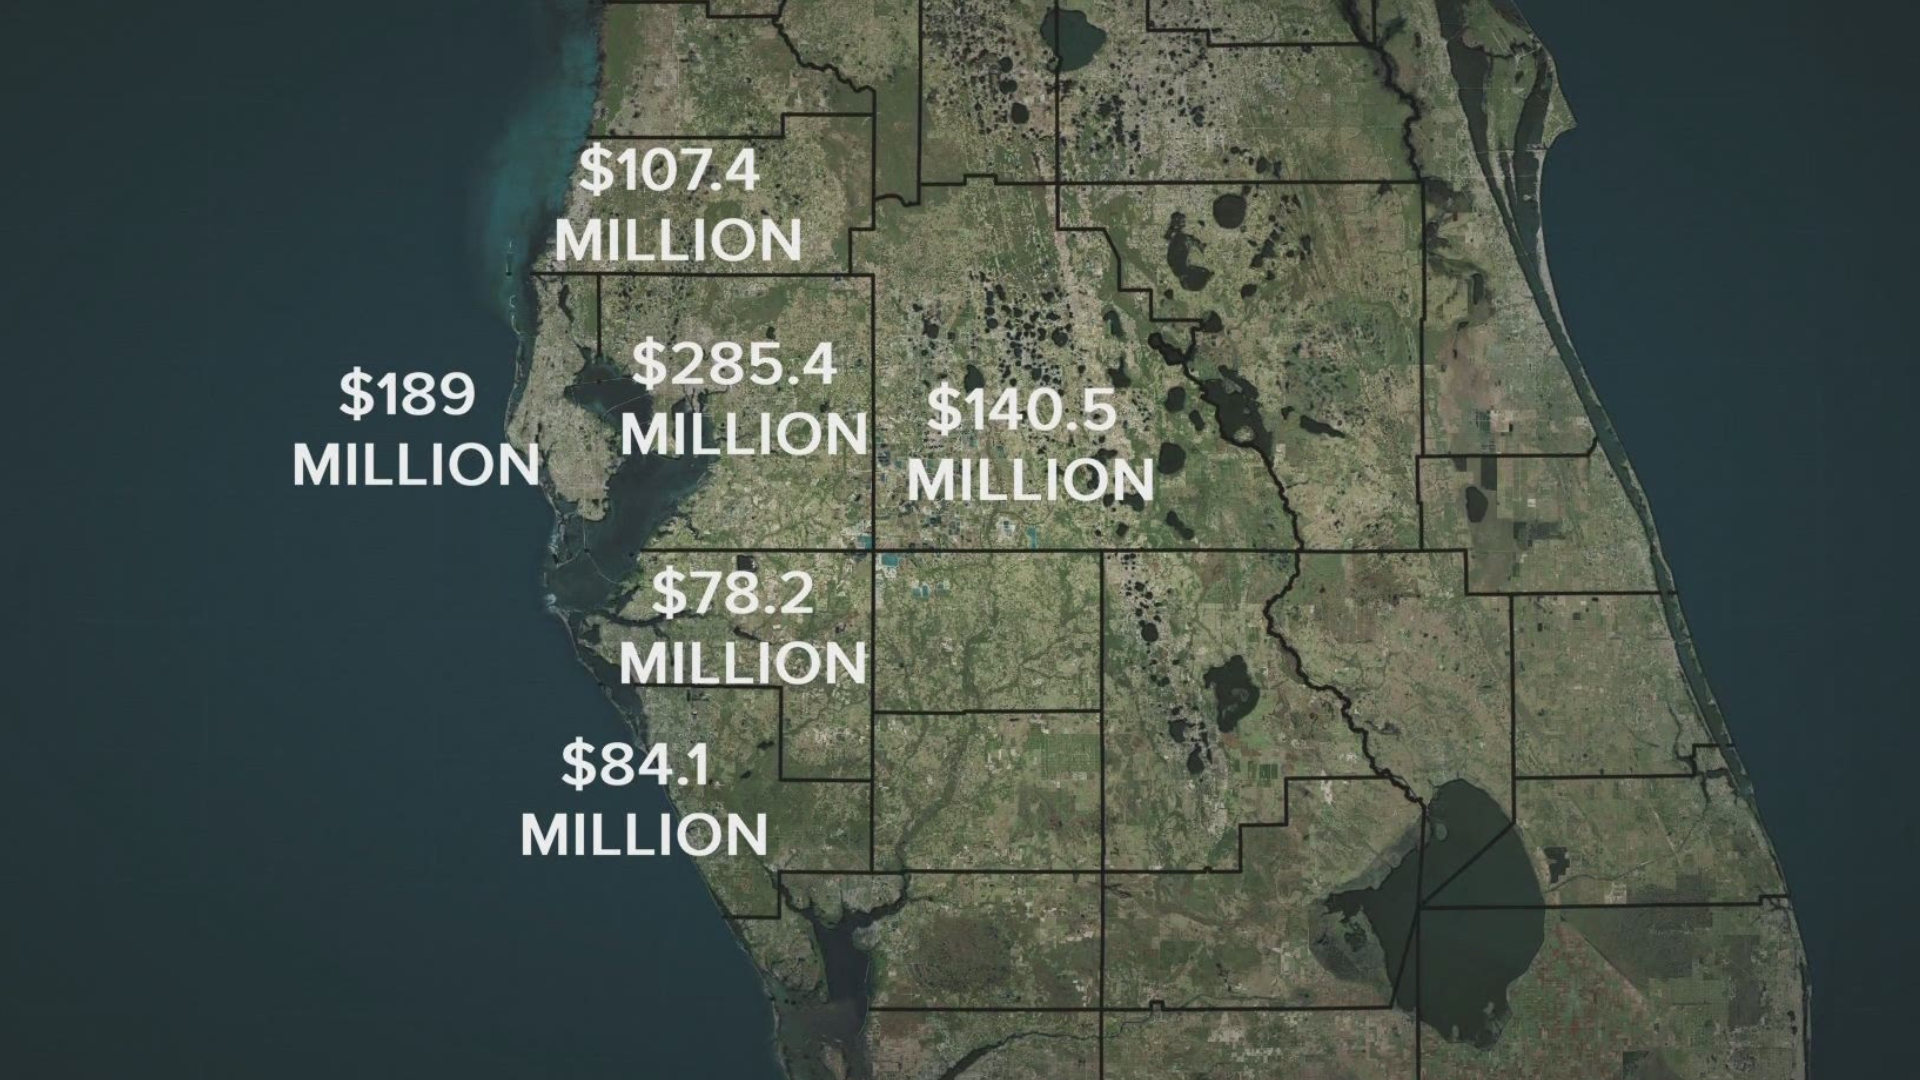 10 Tampa Bay is breaking down where some of the $17.6 billion the state of Florida is getting from the American Rescue Plan is going.